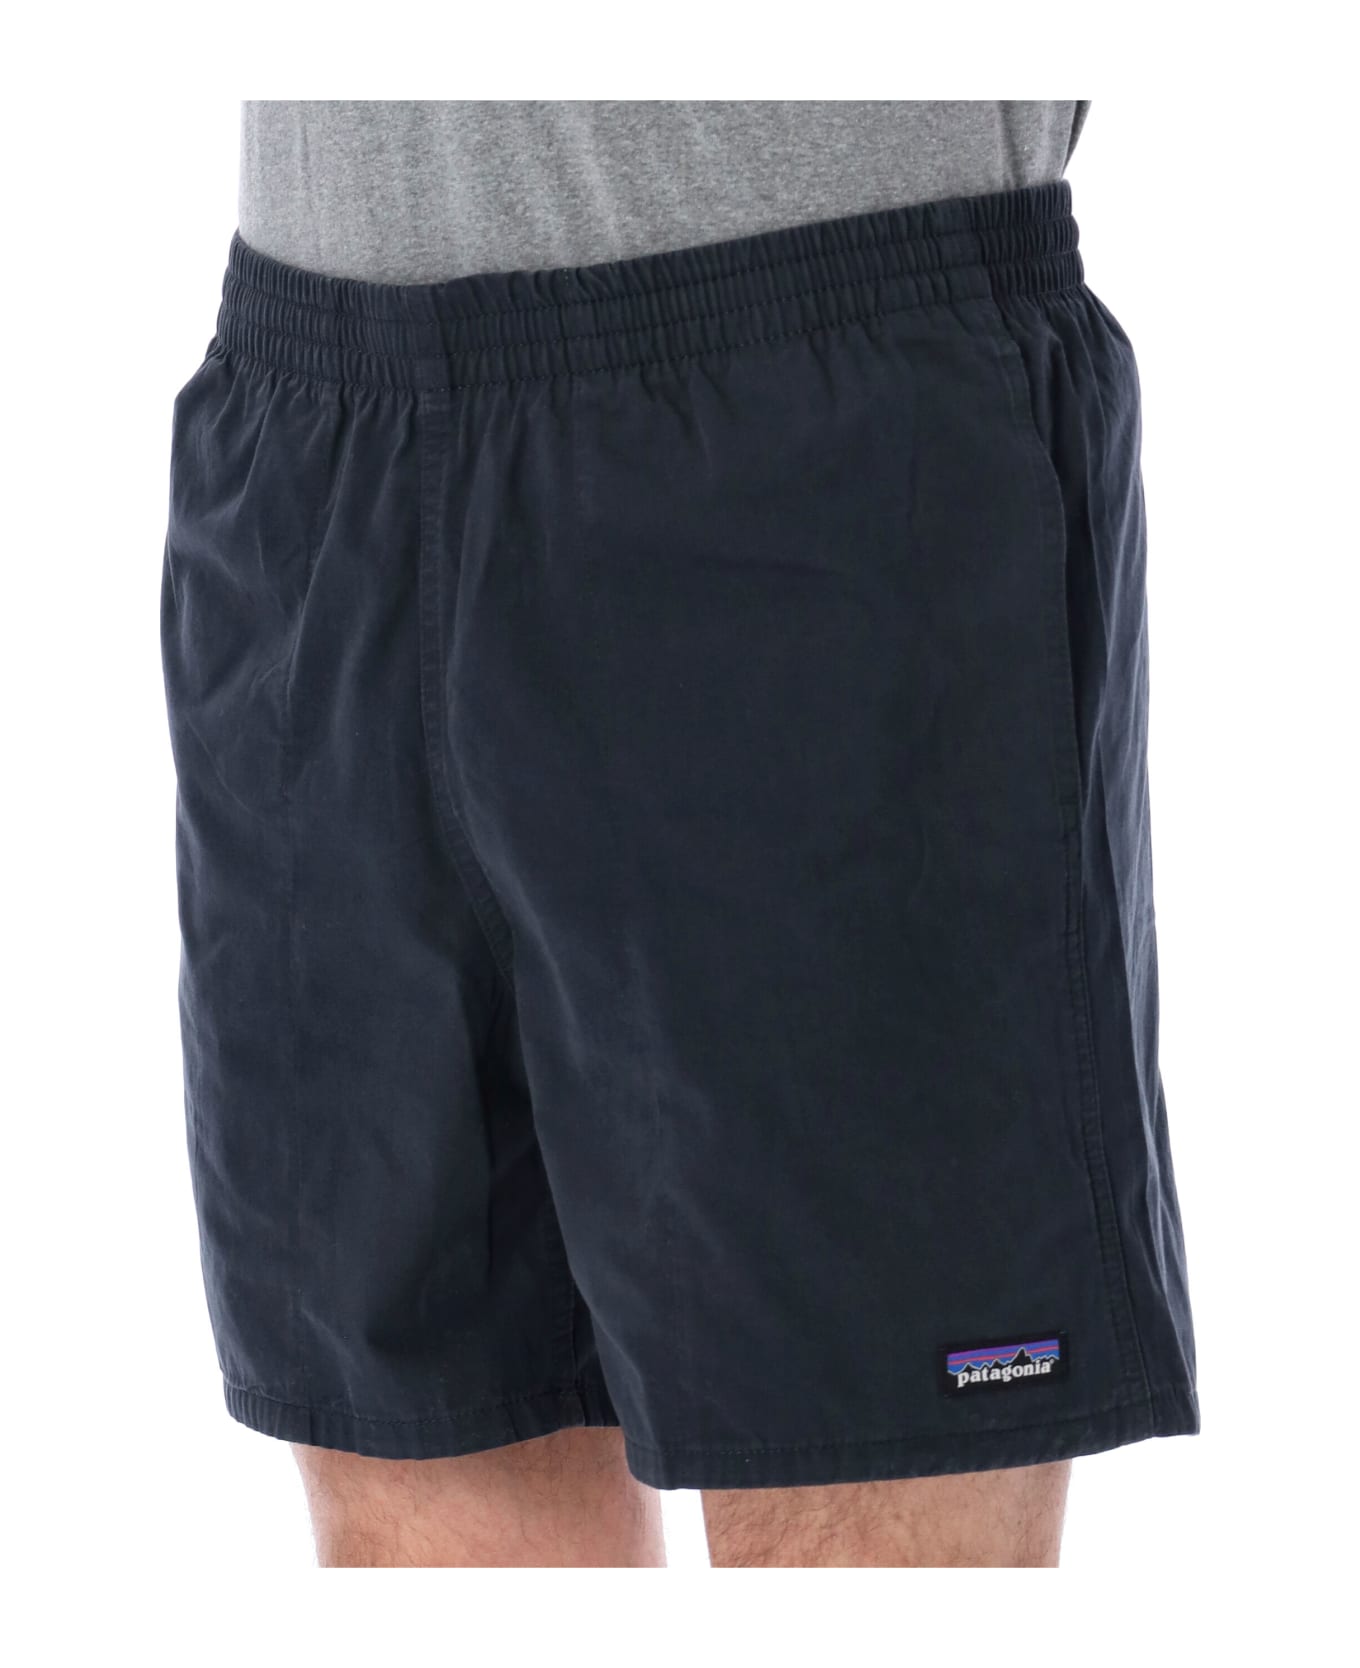 Patagonia Funhoggers Shorts - 6" - PITCH BLUE